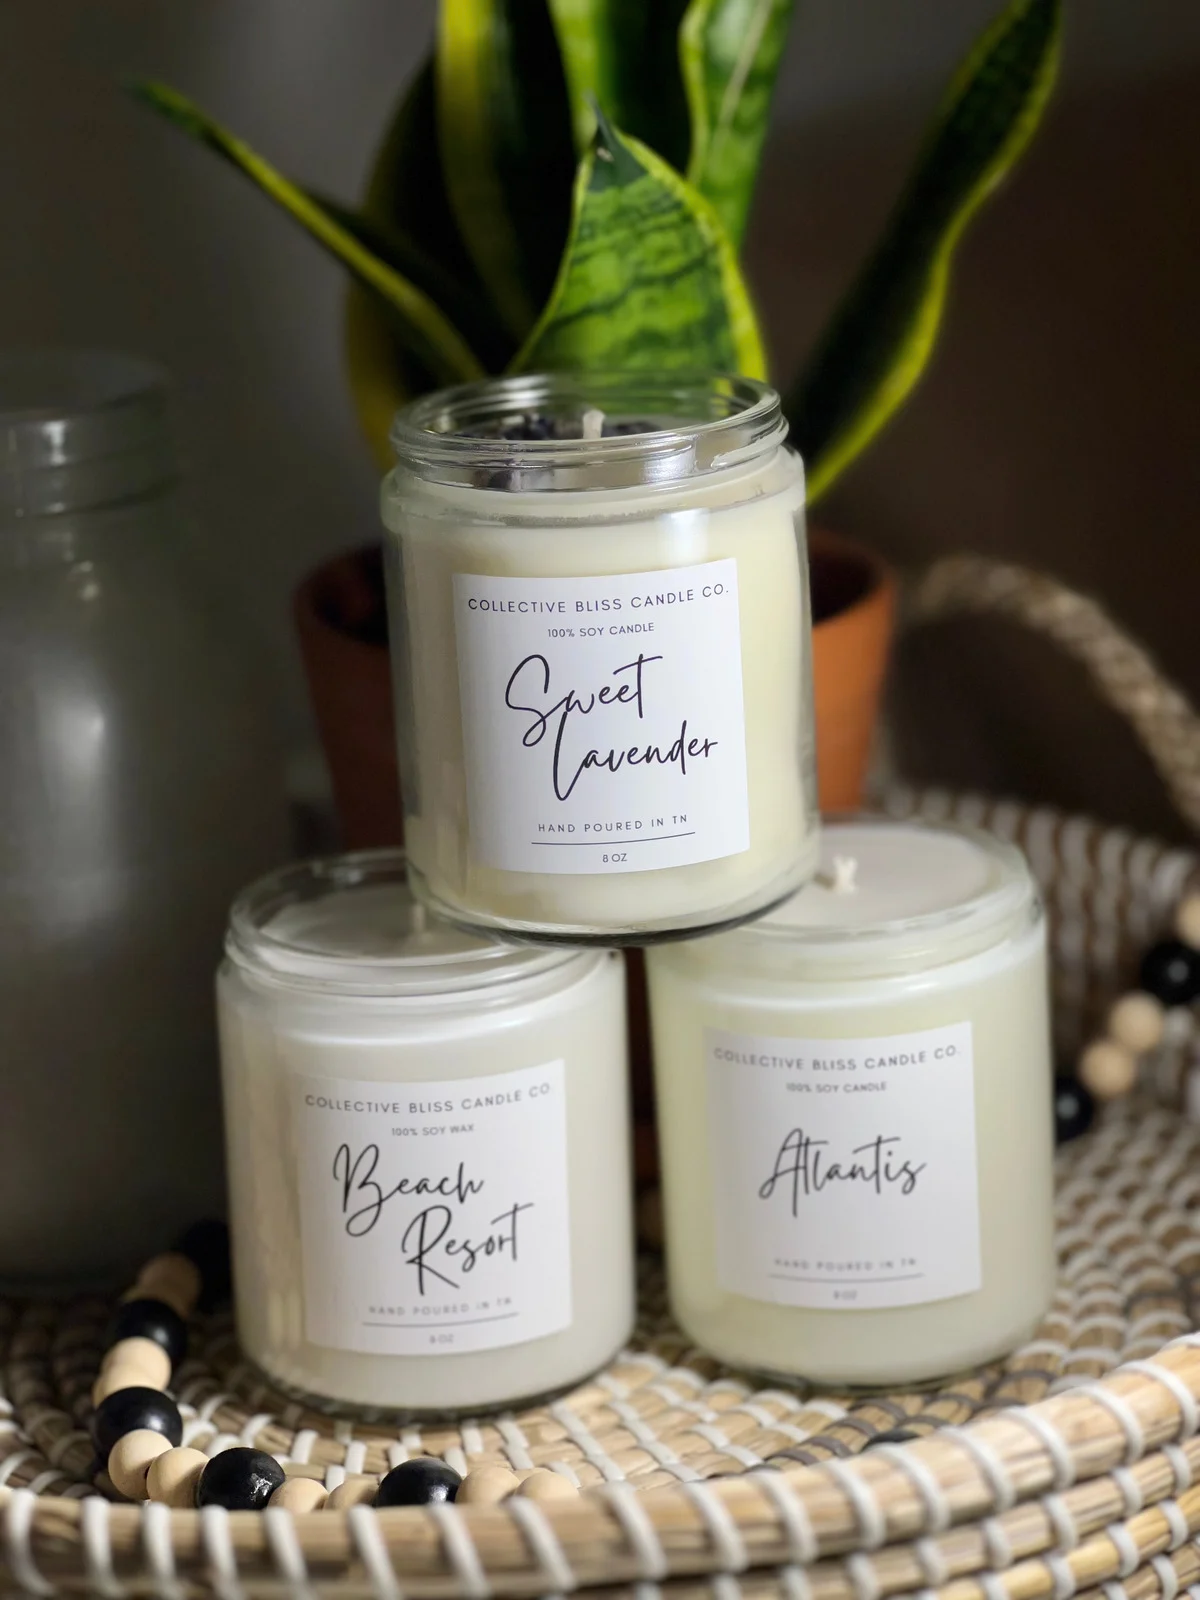 8oz Soy Candles - Spring and Summer Scents – Collective Bliss Candle Co.